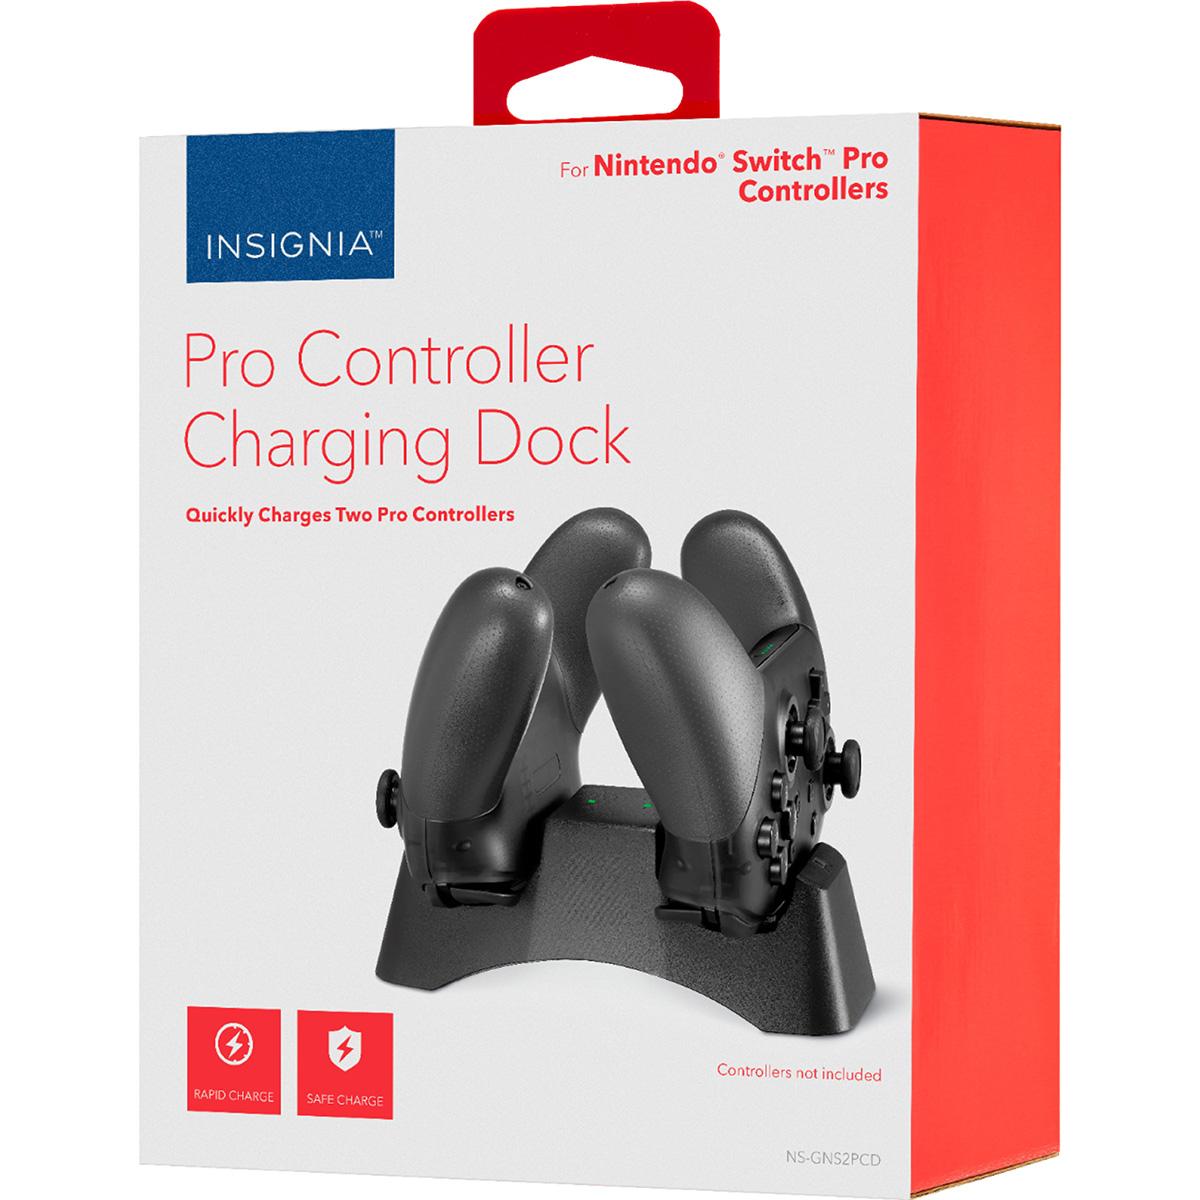 Insignia Charging Station Dock for Nintendo Switch Pro Controllers for $9.99